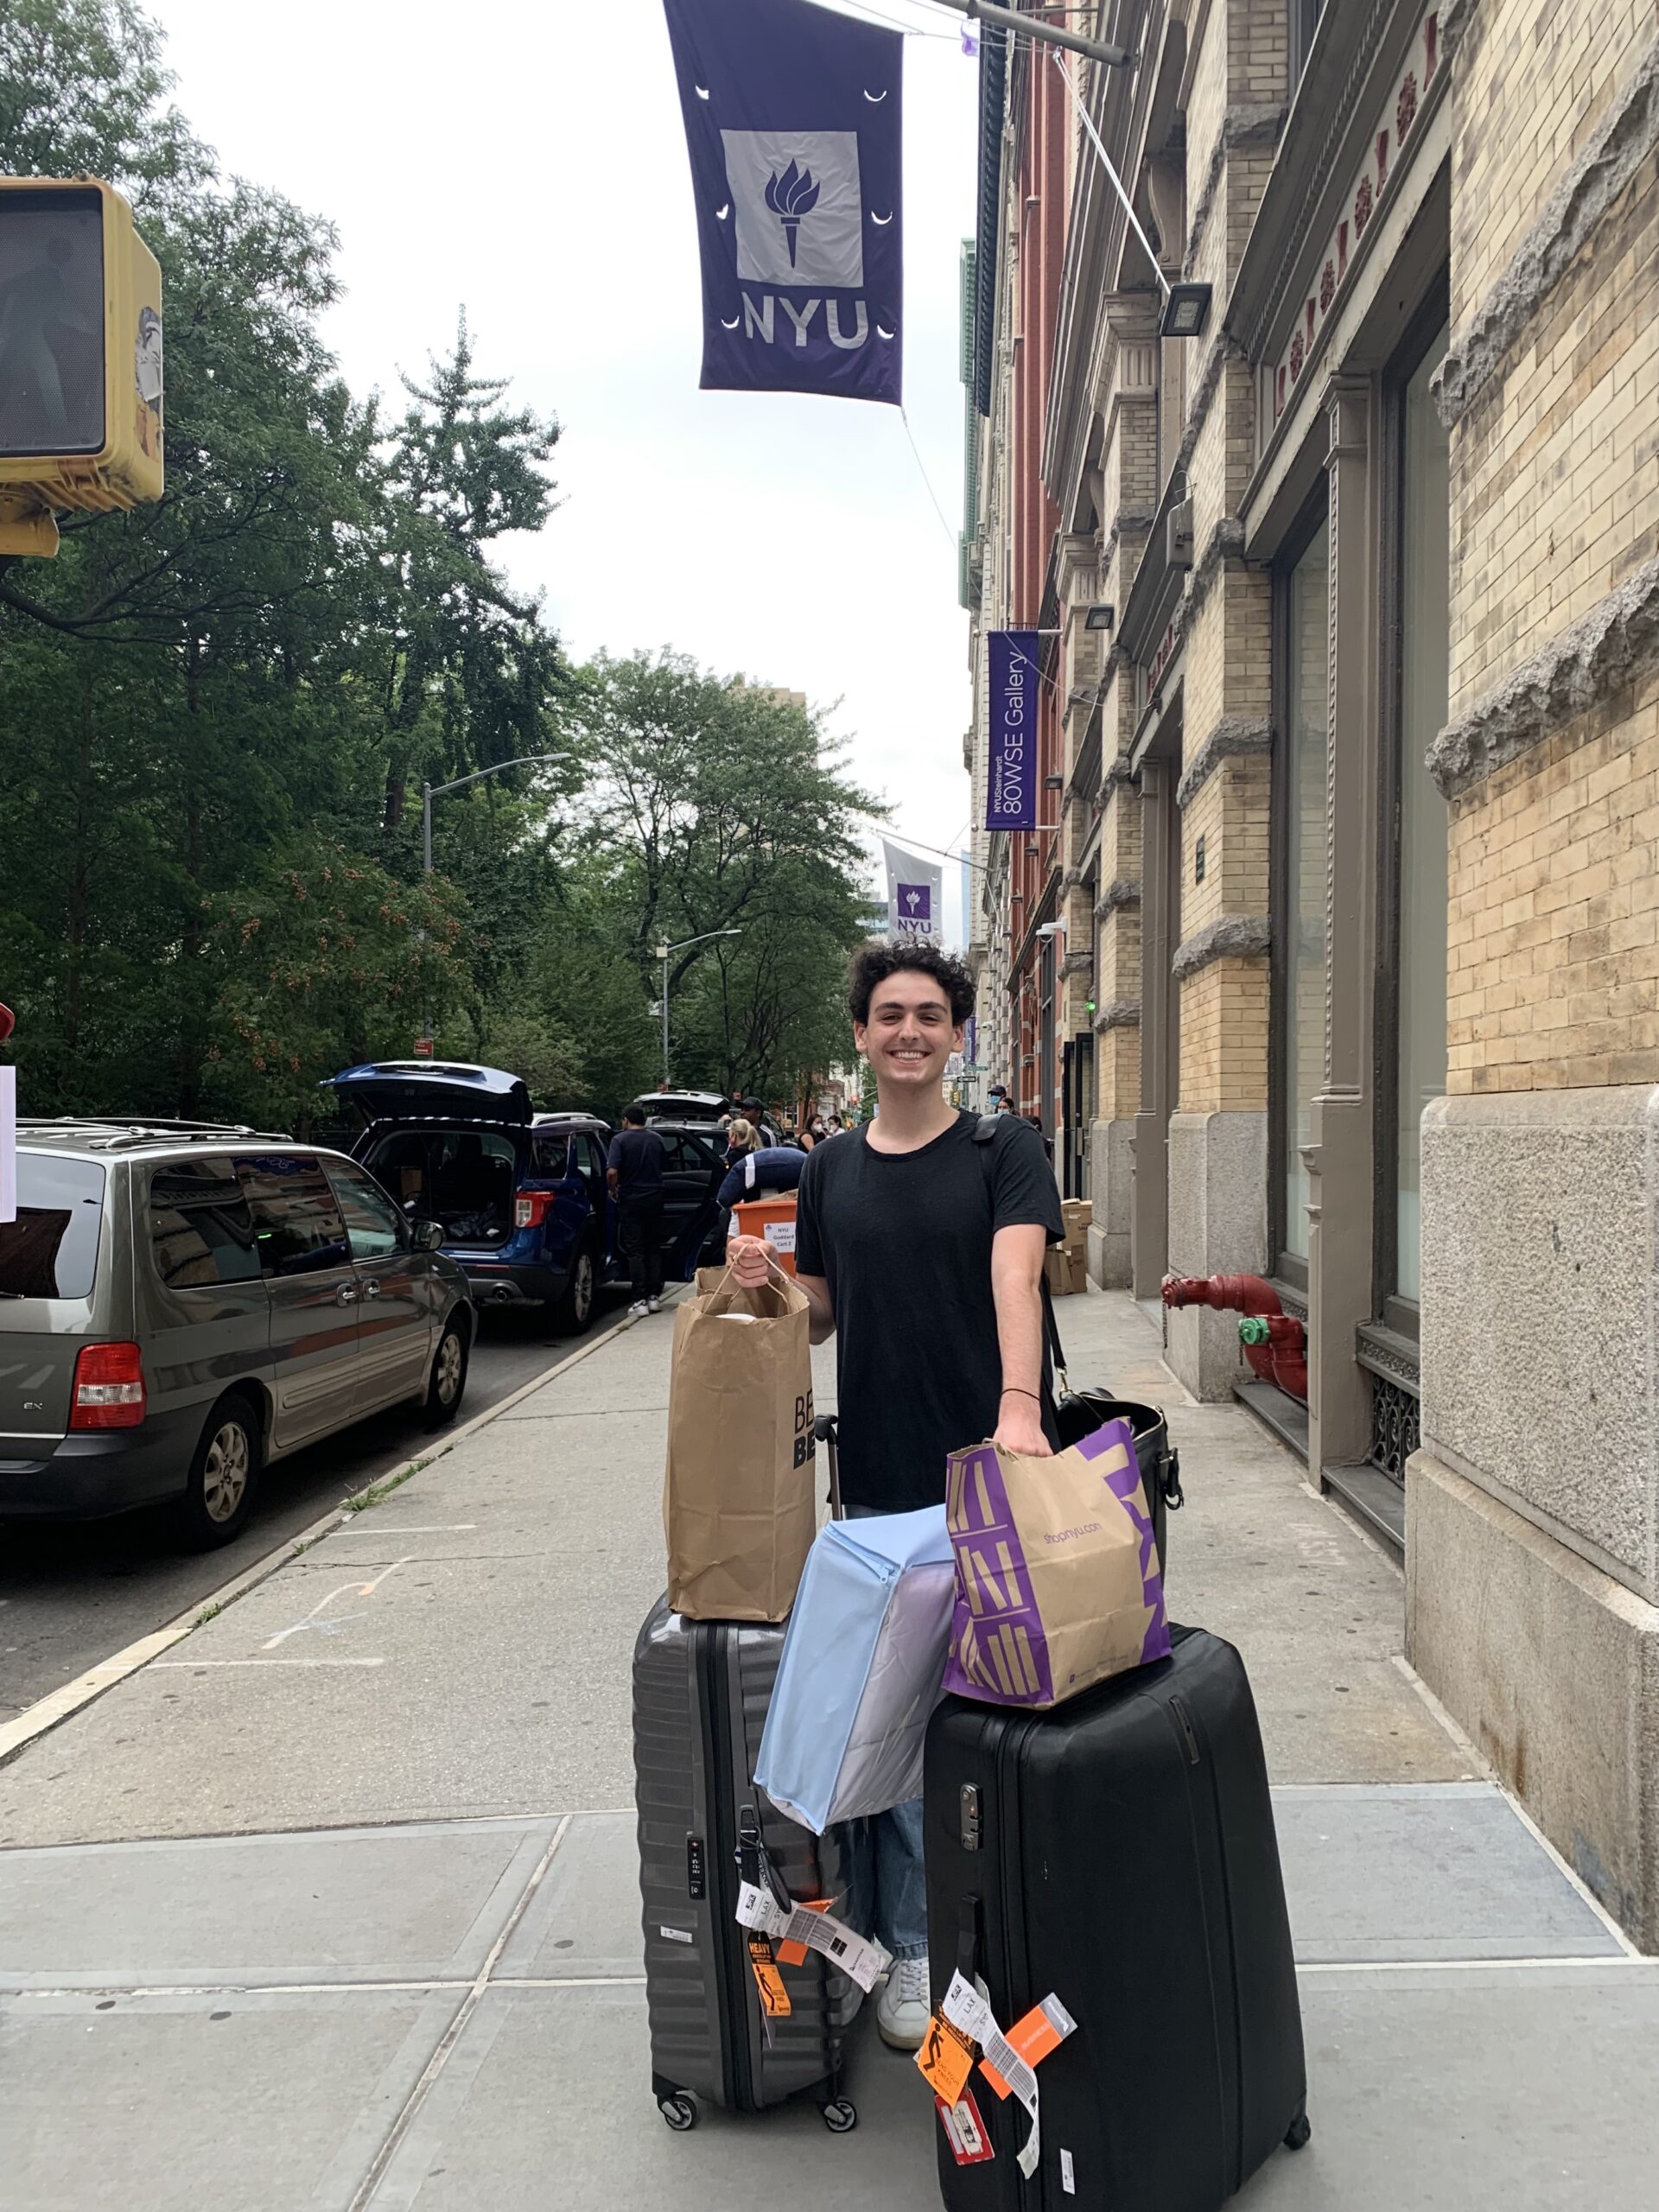 Myself standing outside one of the NYU First-Year dorms on Washington Square East, with an overwhelming number of suitcases and bags in my possession.